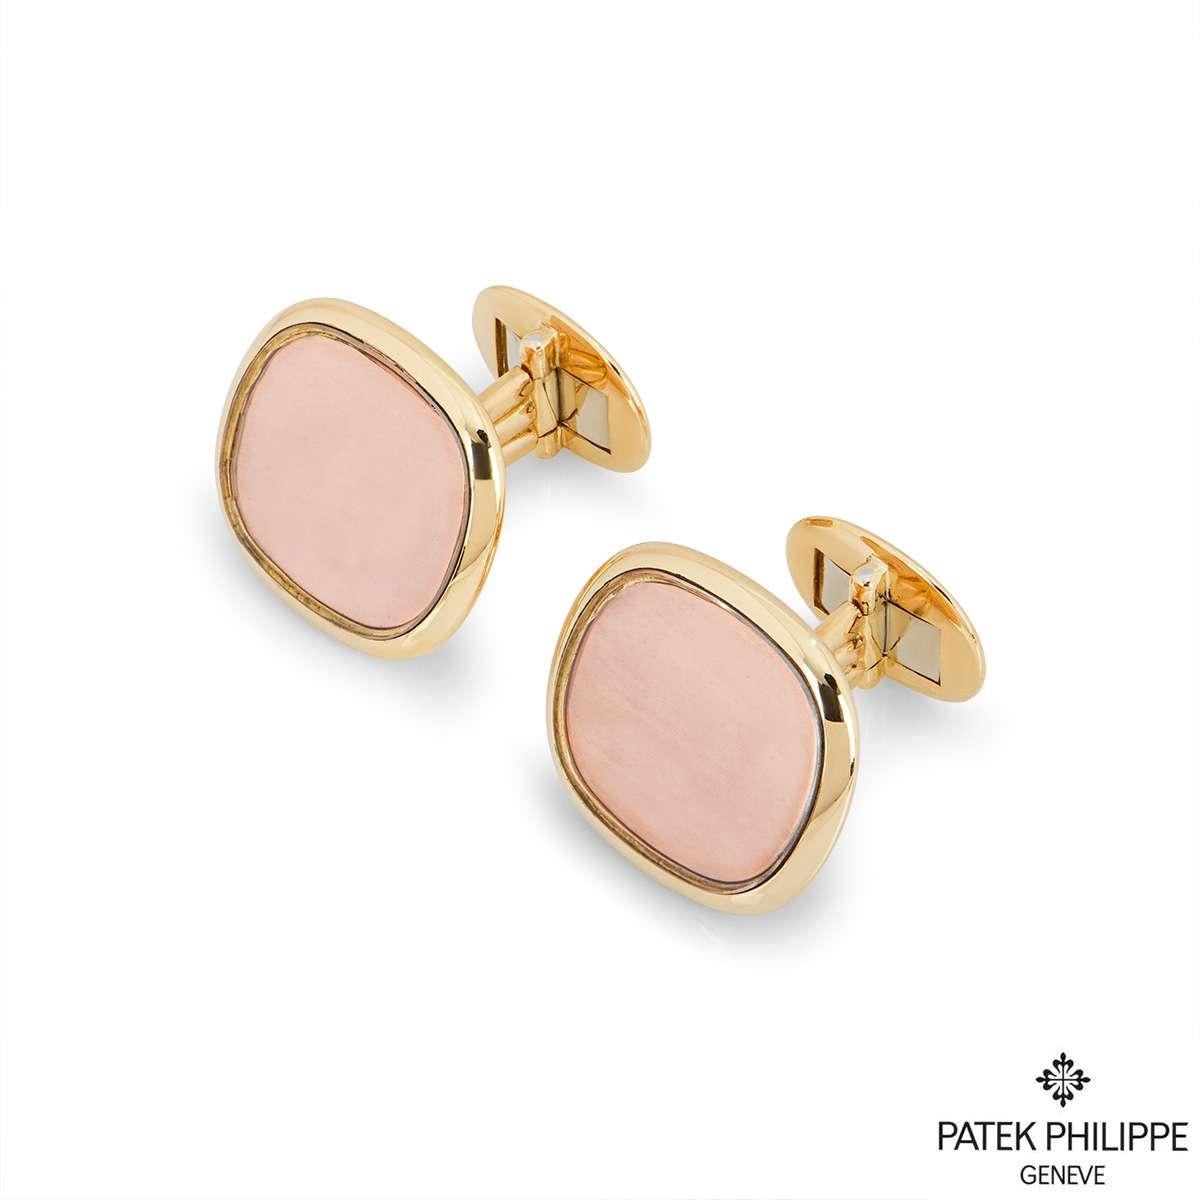 A pair of 18k yellow gold cufflinks by Patek Philippe from the Ellipse collection. The cufflinks are set to the front with a polished yellow gold surround and rose accent enamel center. The cufflinks have whale back fittings and have a gross weight